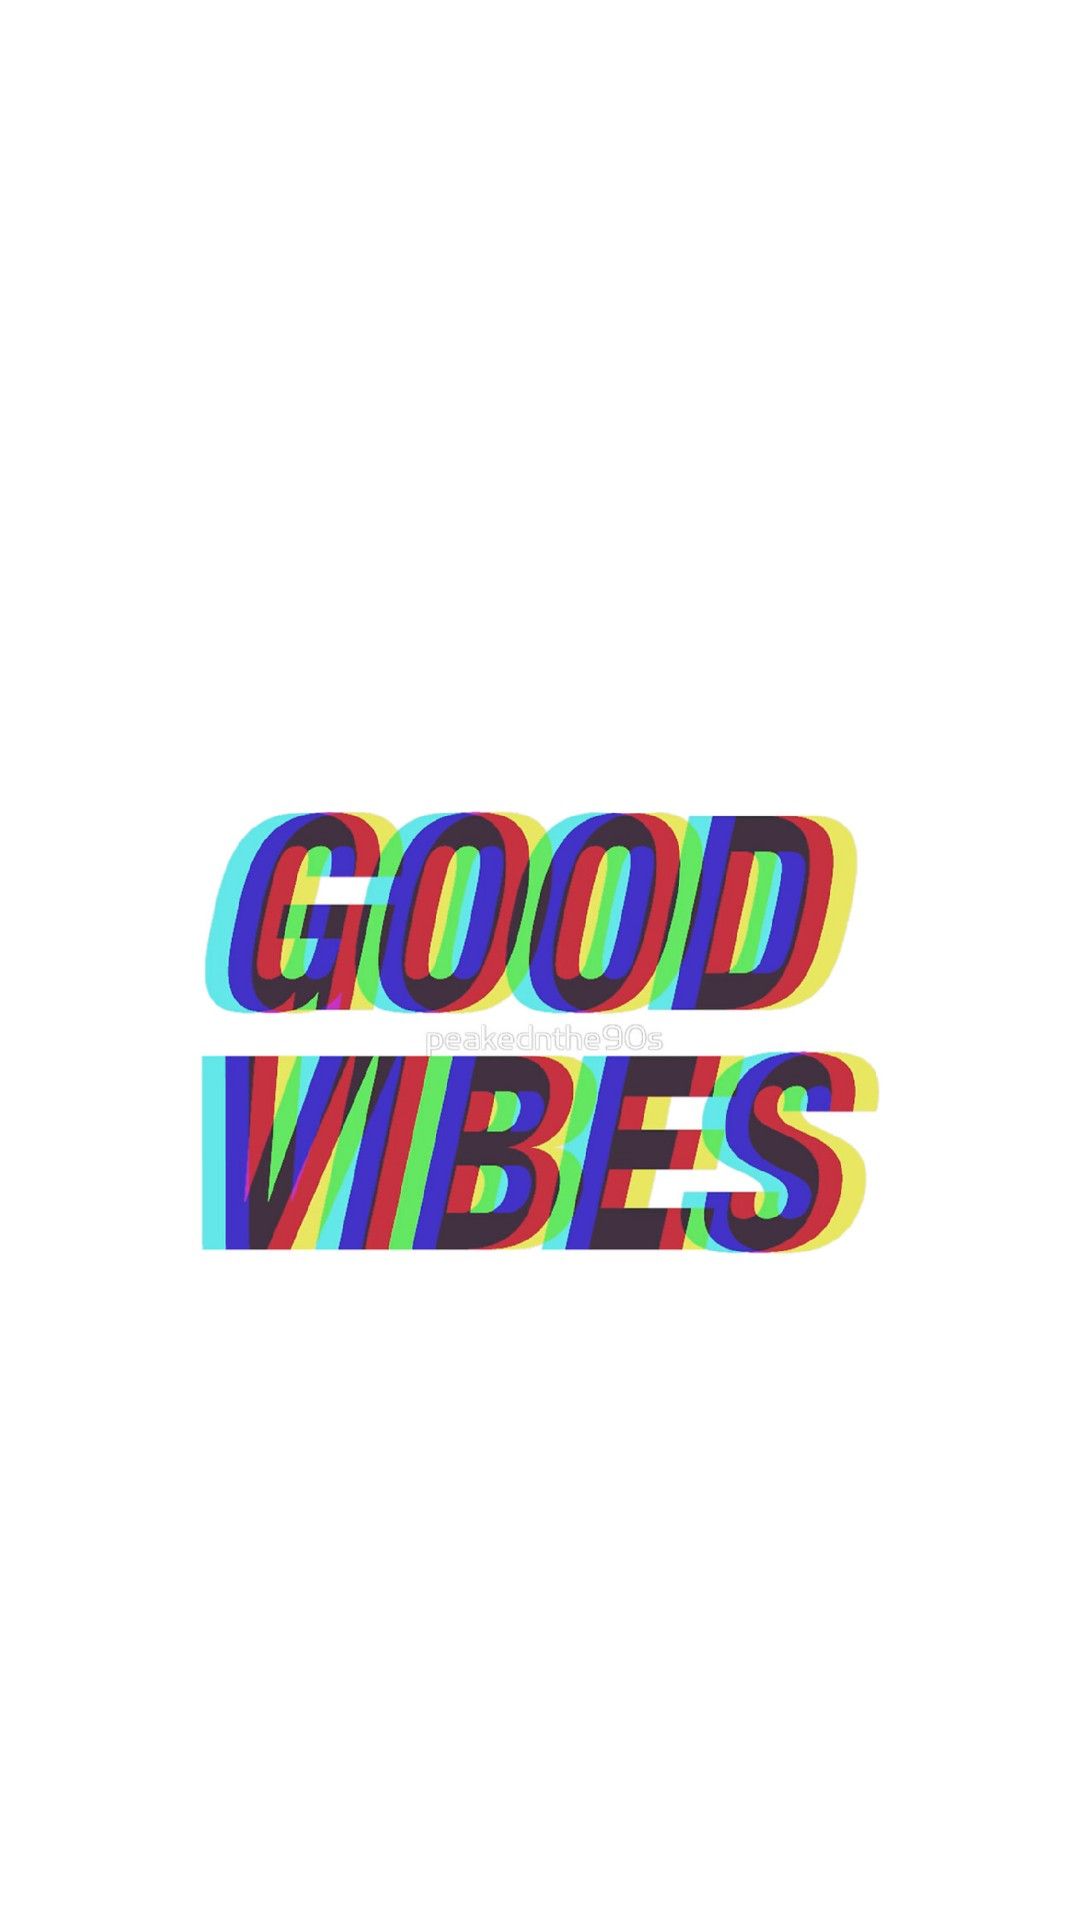 Good vibes colorful text on a white background - 